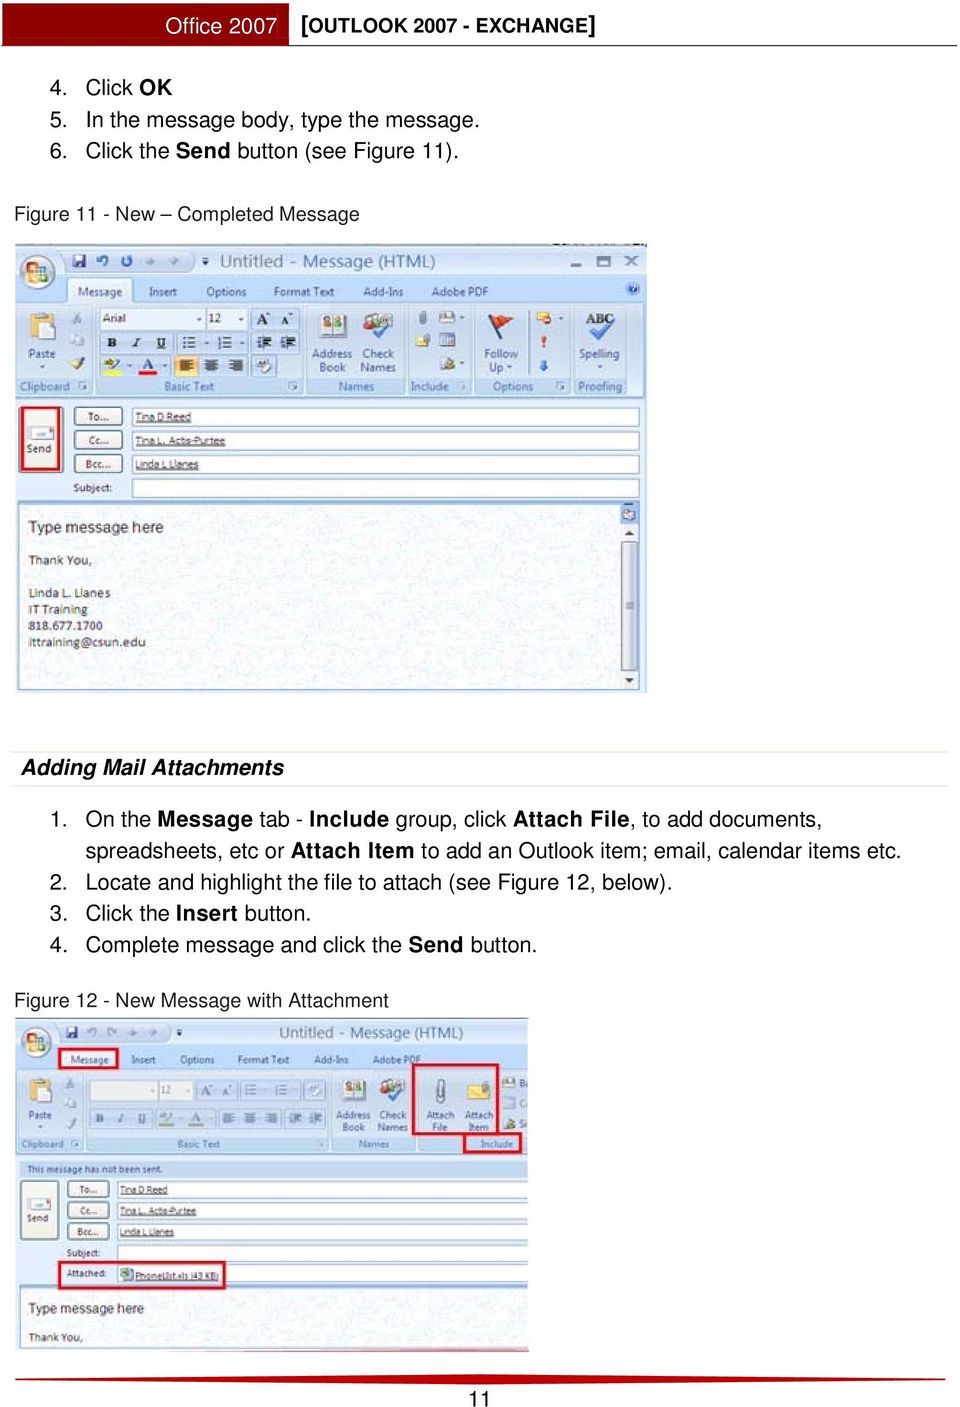 On the Message tab - Include group, click Attach File, to add documents, spreadsheets, etc or Attach Item to add an Outlook